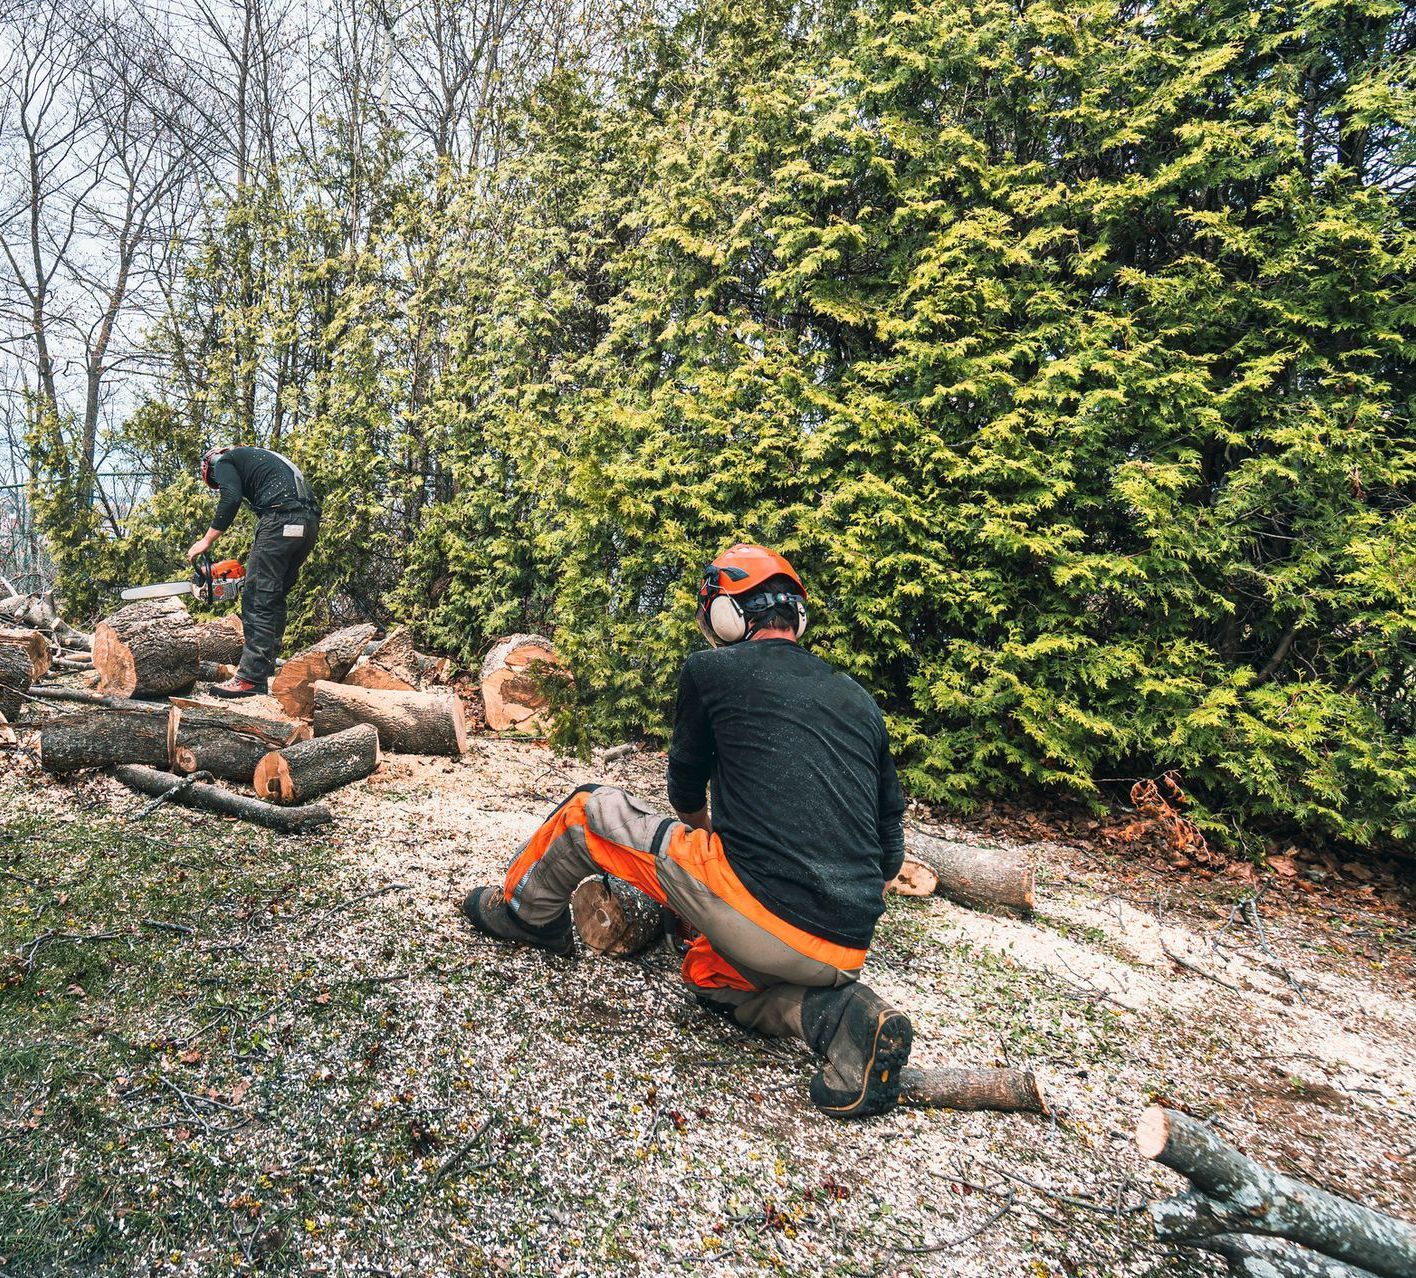 A tree specialist is sitting on a log in a forest while another man is cutting logs with a chainsaw.